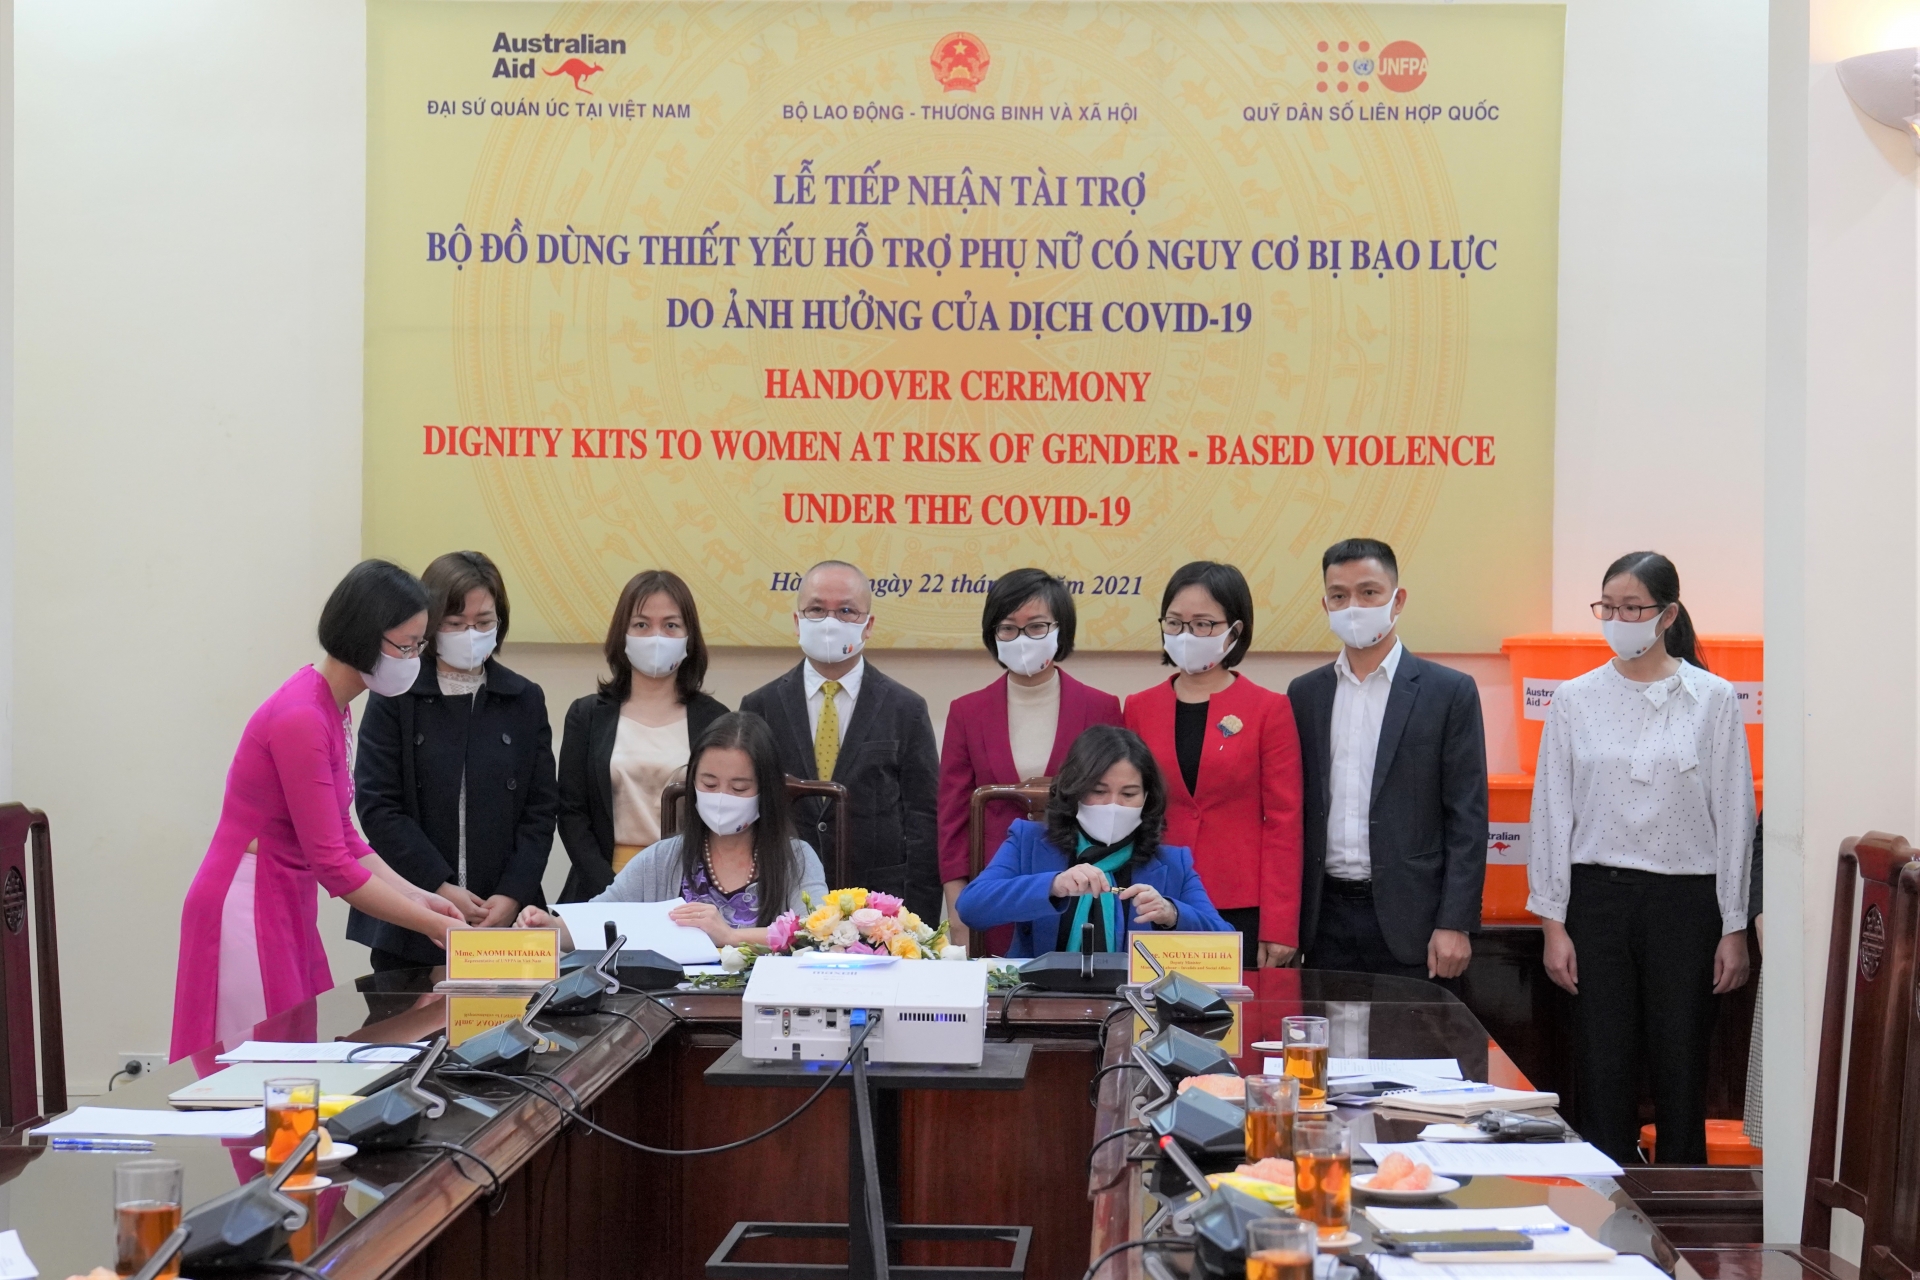 2,750 Dignity Kits support women and girls at risk of violence amidst COVID 19